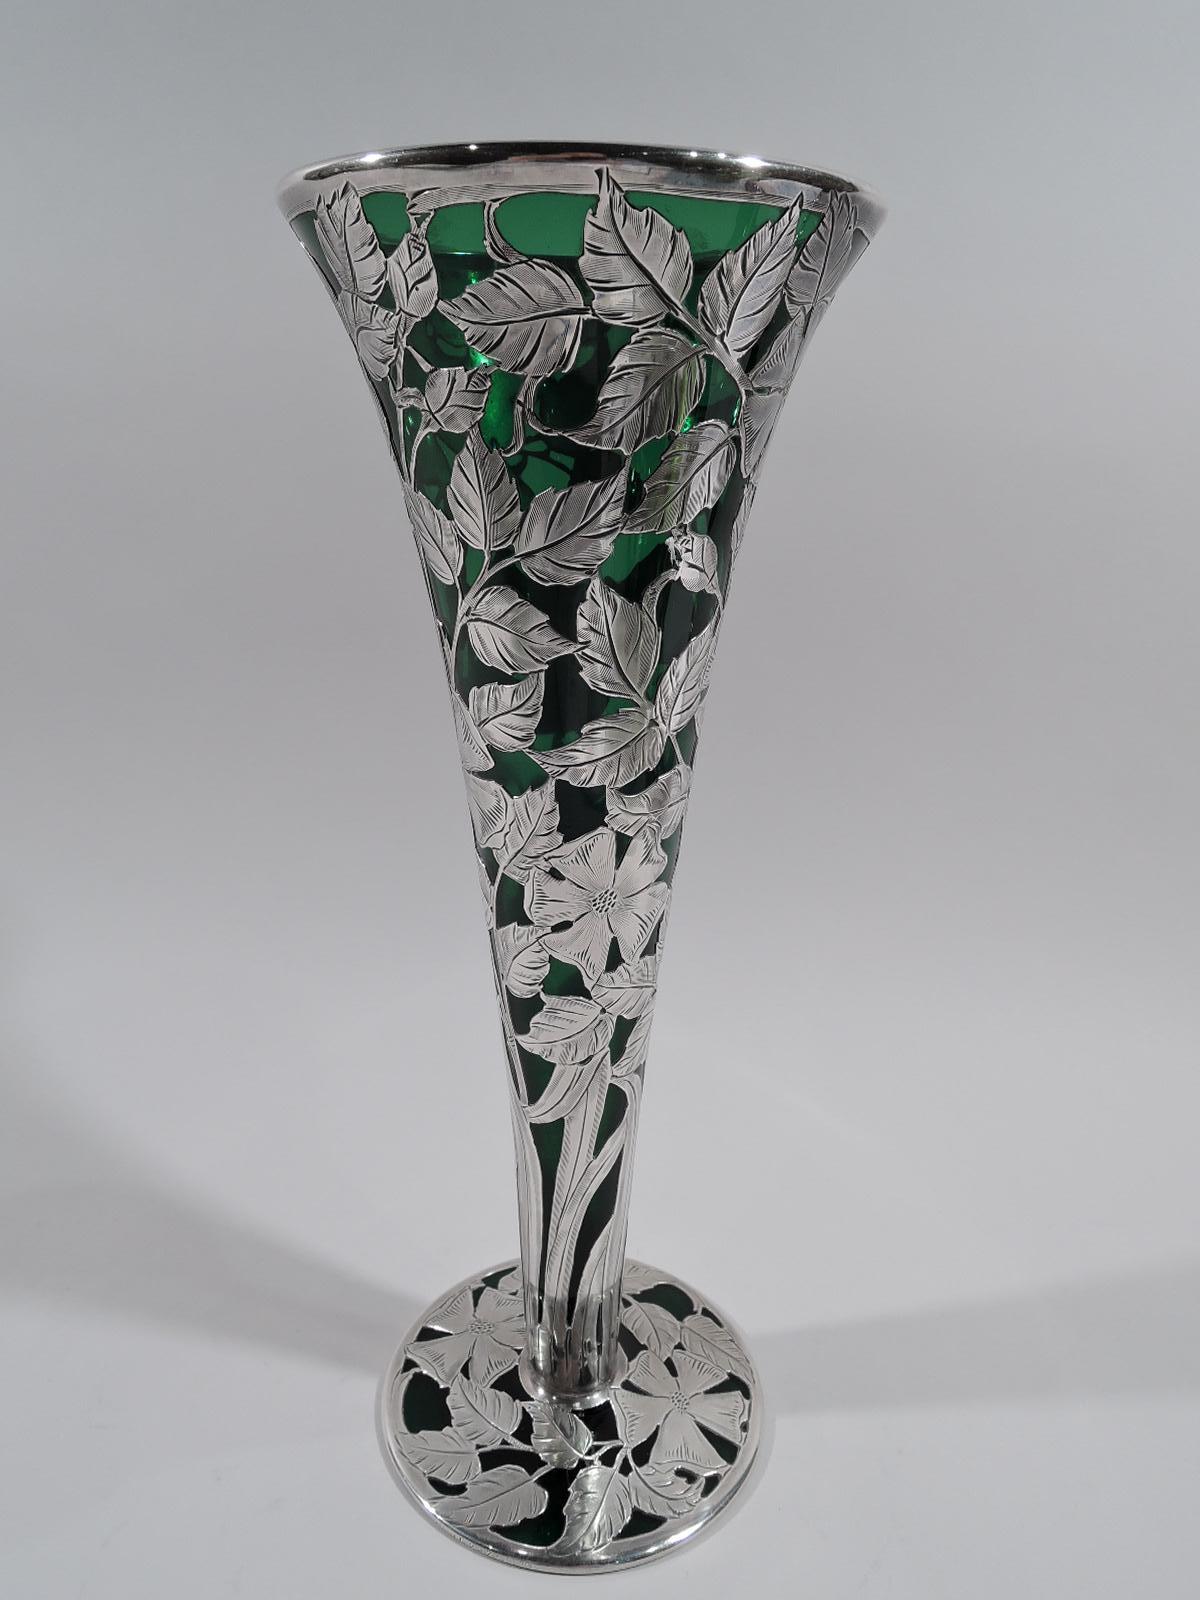 Turn-of-the-century Art Nouveau glass vase with engraved silver overlay. Made by Alvin in Providence. Conical on flat round foot. Dense vertical overlay in form of entwined tendrils and leafing and flowering branches. Glass is dark green. Pontil